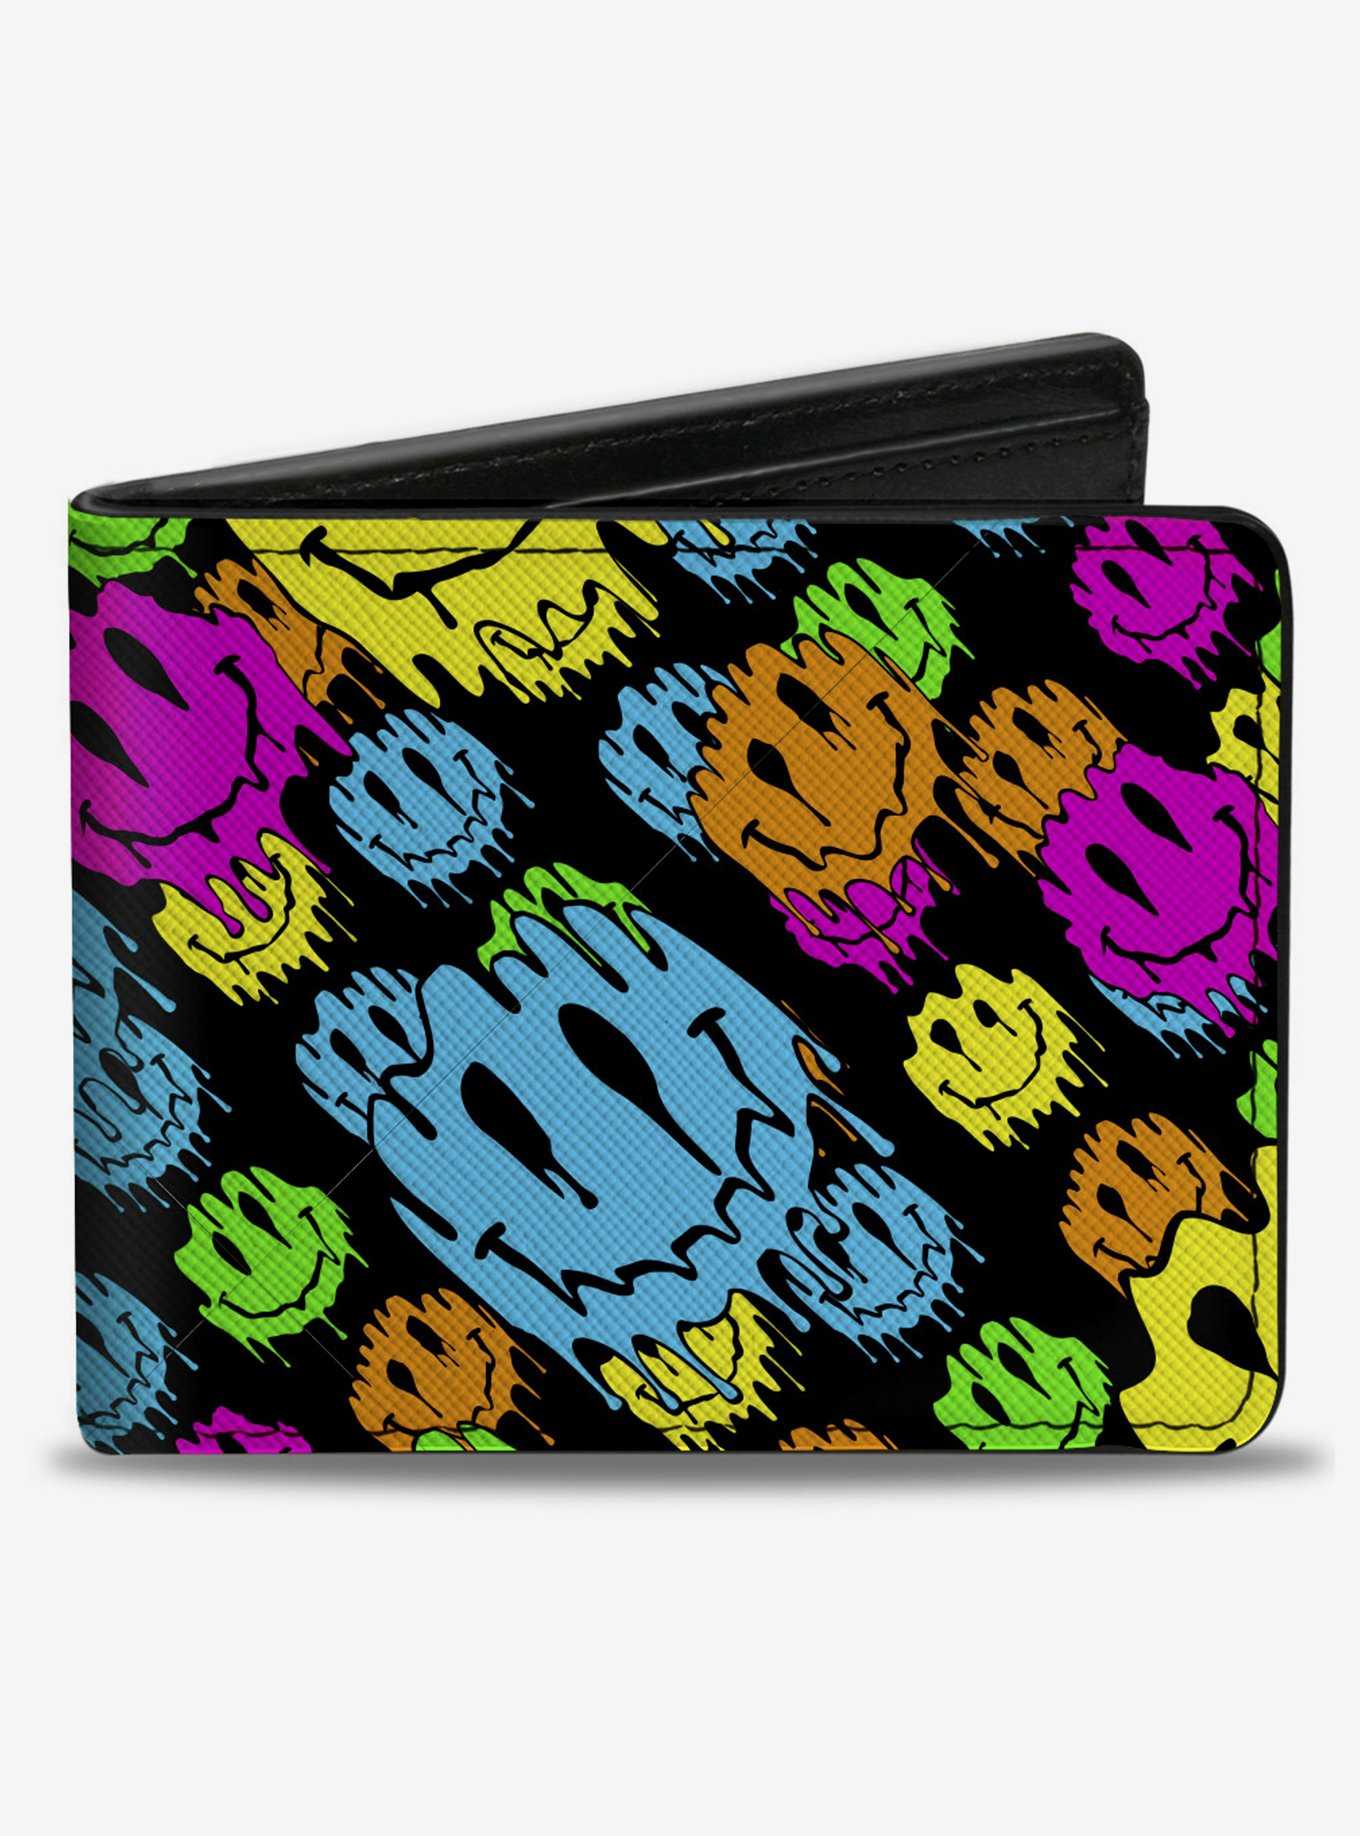 Smiley Faces Melted Stacked Bifold Wallet, , hi-res